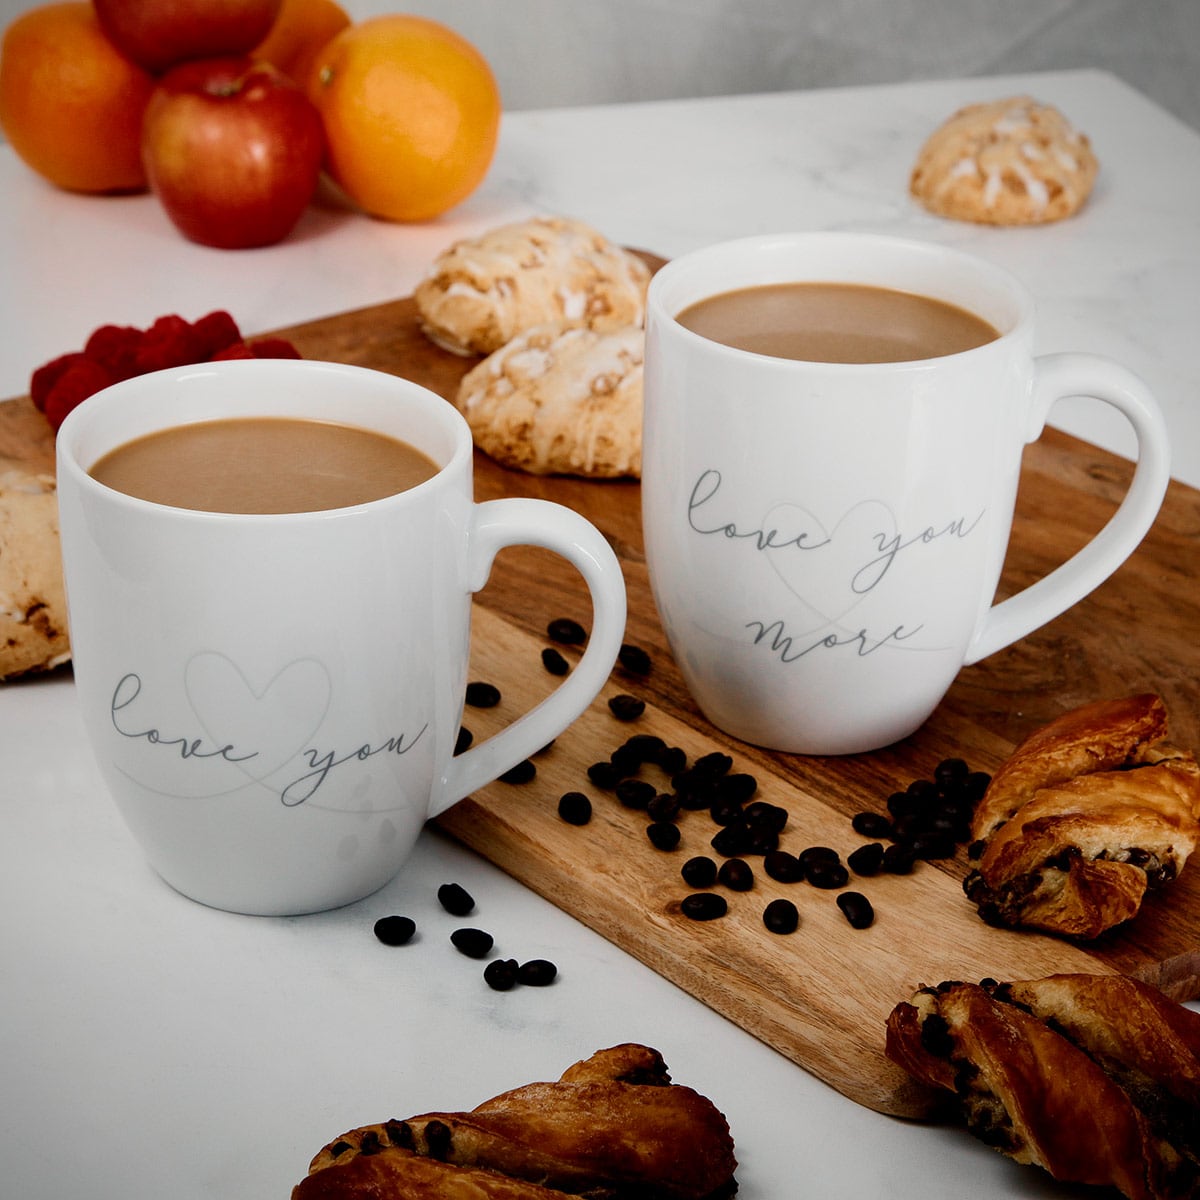 Love You More His and Hers Coffee Mugs